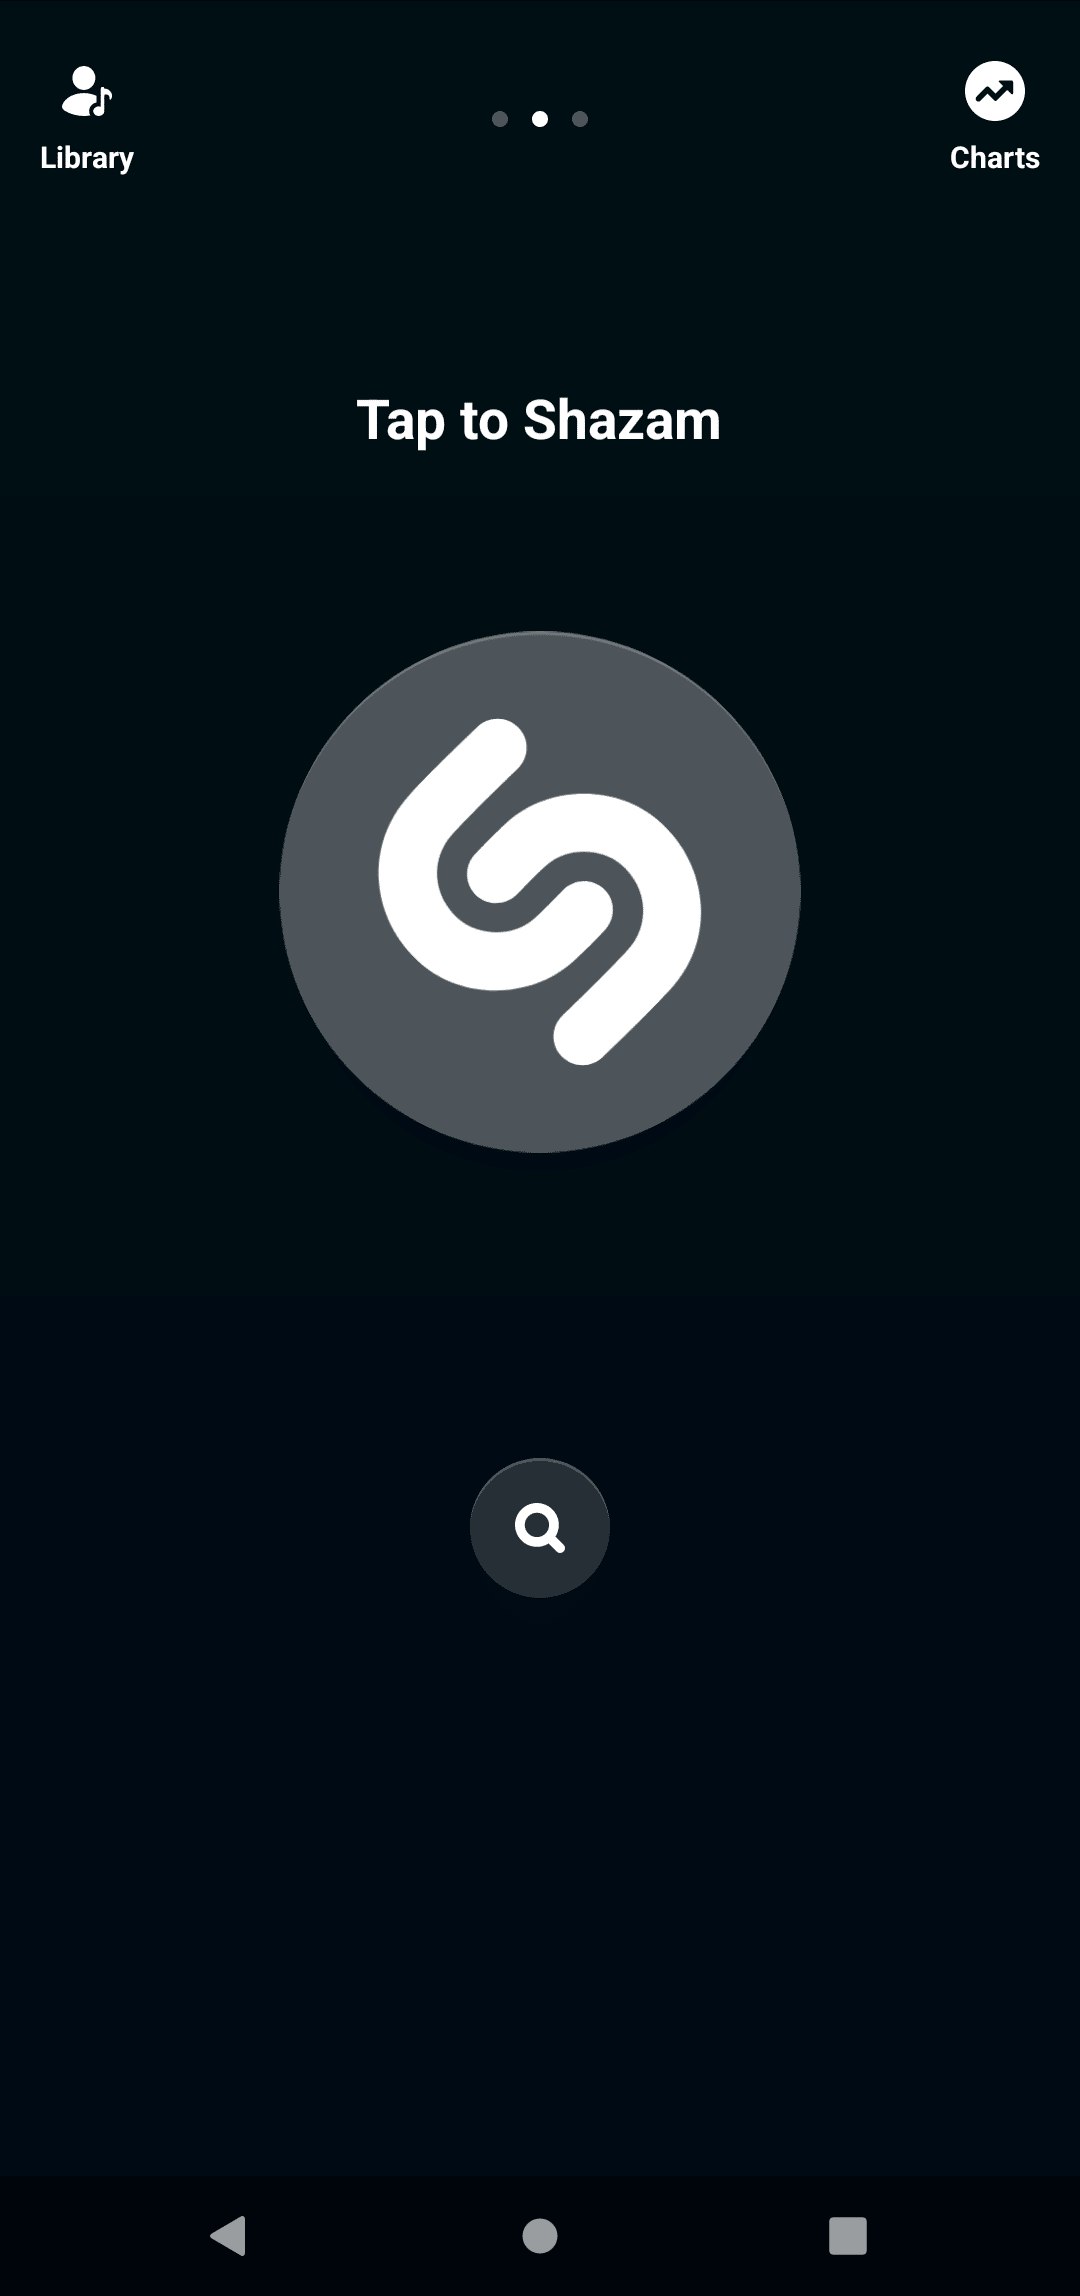 use the search icon to type the lyrics or tap to Shazam. How to Identify Songs in YouTube Videos